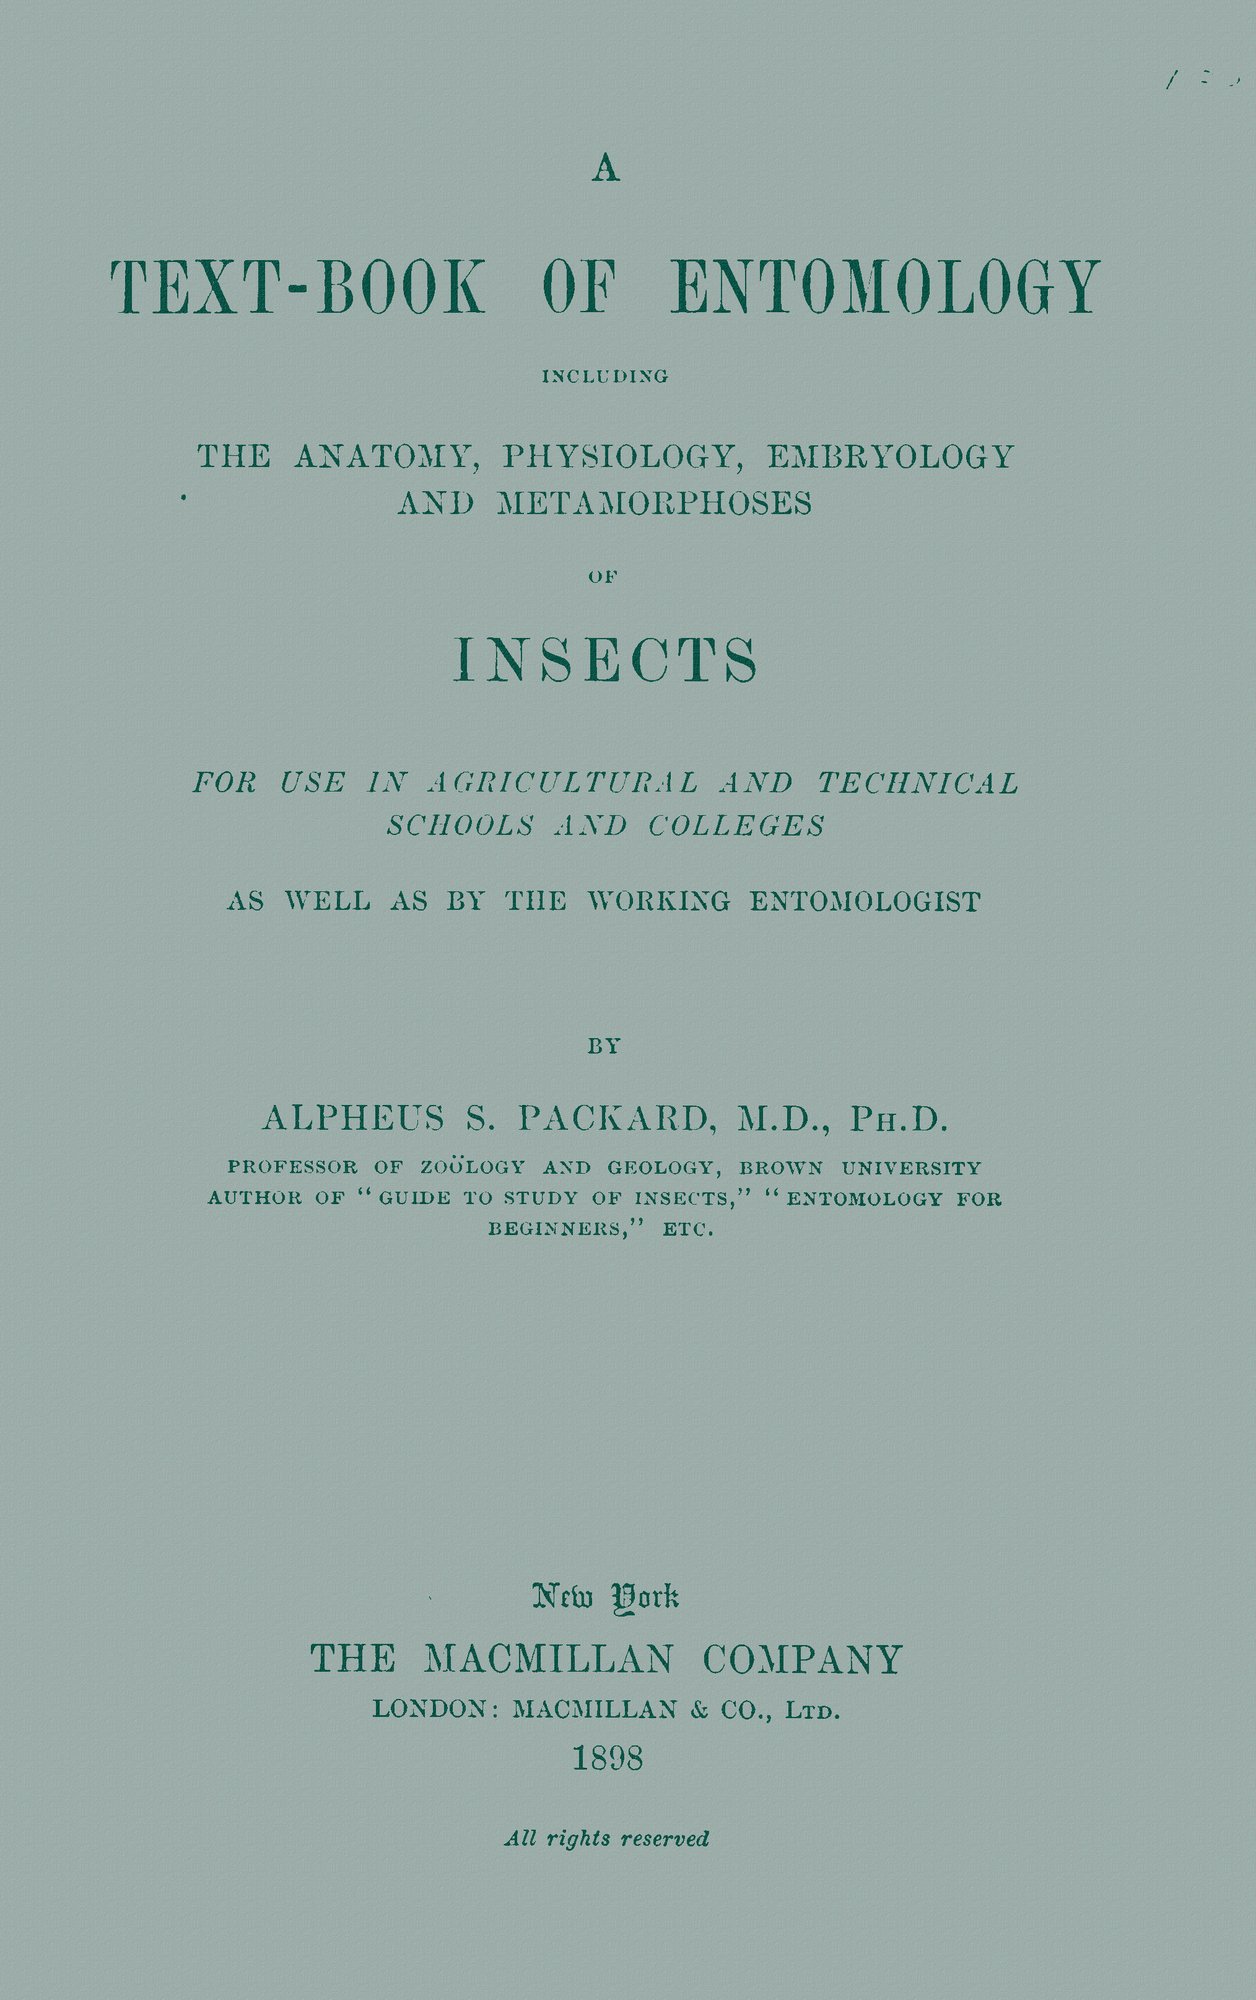 A Text-book of Entomology&#10;Including the Anatomy, Physiology, Embryology and Metamorphoses of Insects for Use in Agricultural and Technical Schools and Colleges as Well as by the Working Entomologist